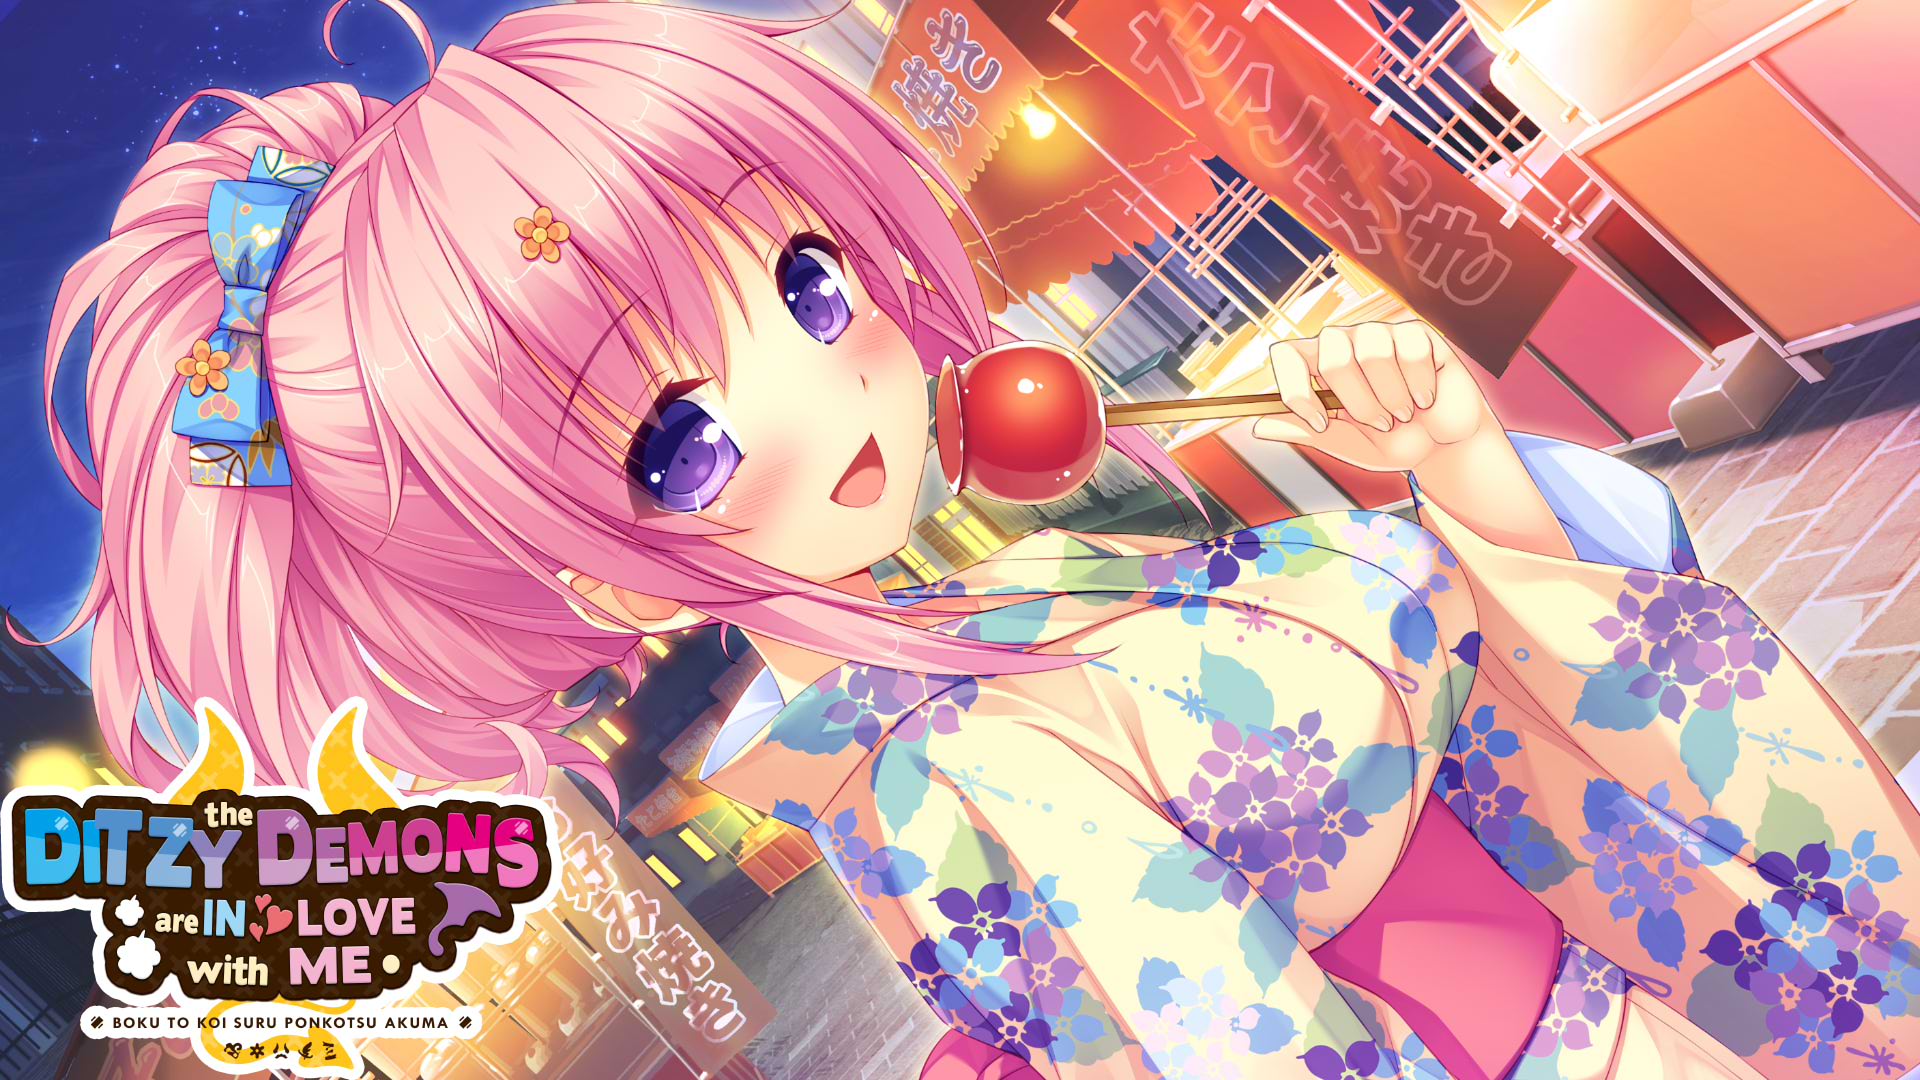 Code M. reccomend ditzy demons miyabi route first